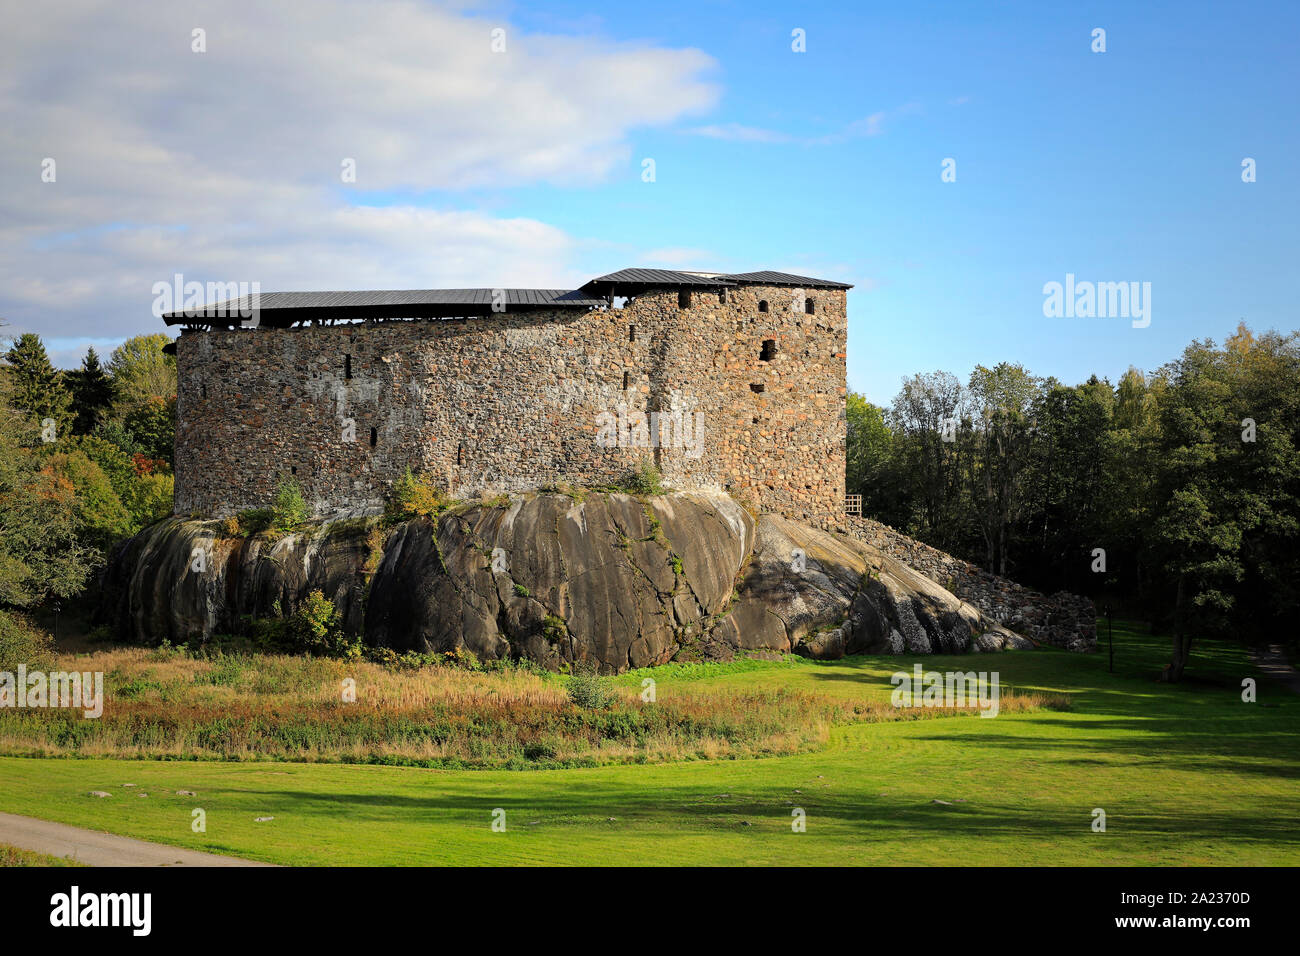 Medieval Raseborg Castle Ruins in autumn. Raseborg Castle was built in 1370s on a rock that was surrounded by water at the time. Snappertuna, Finland. Stock Photo